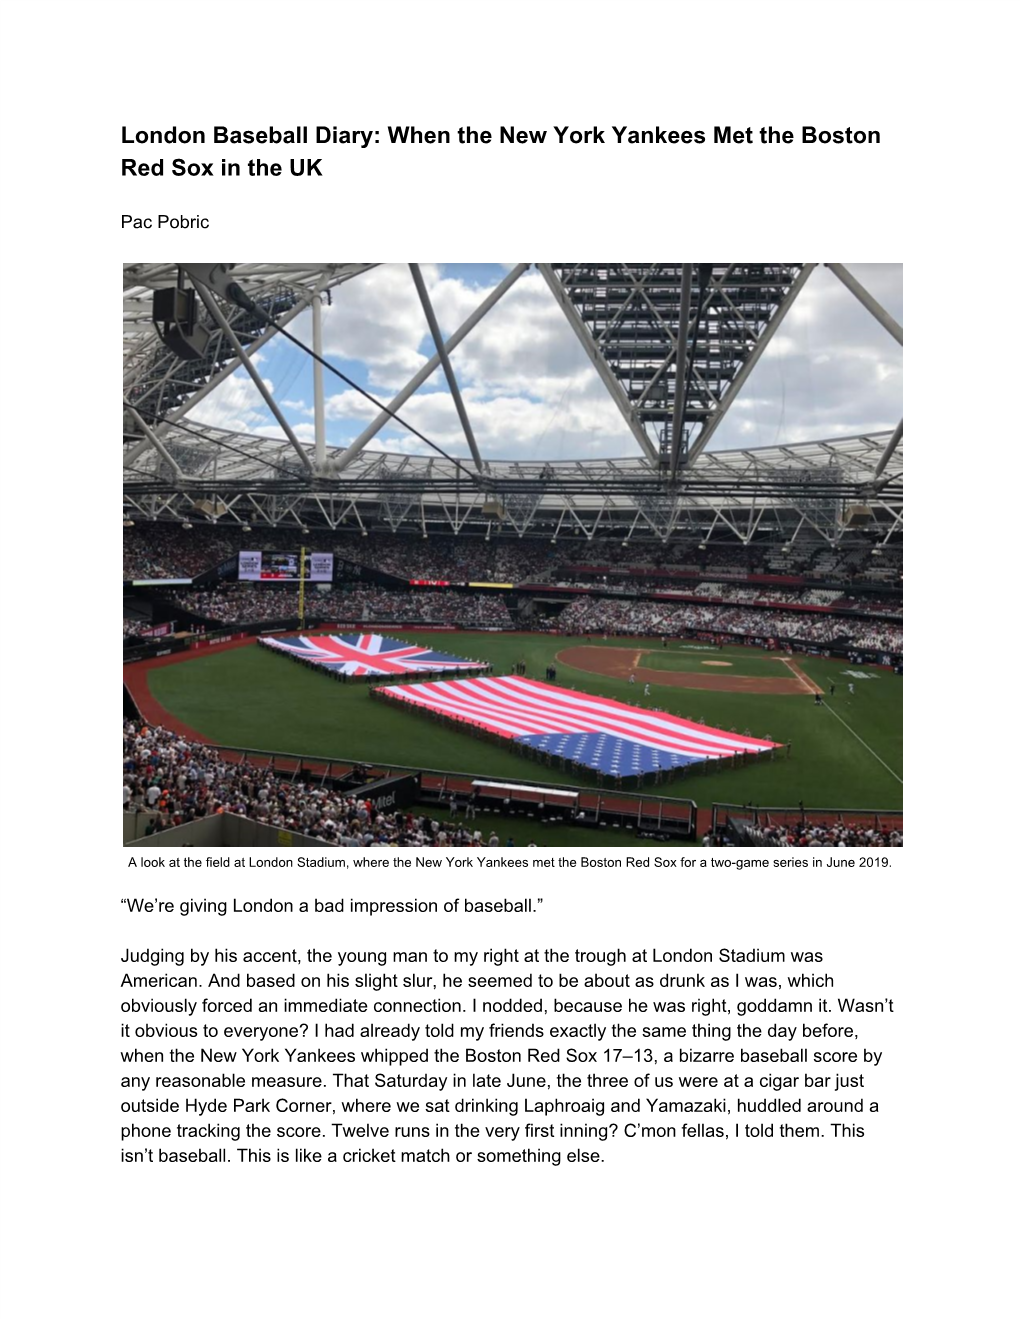 London Baseball Diary: When the New York Yankees Met the Boston Red Sox in the UK